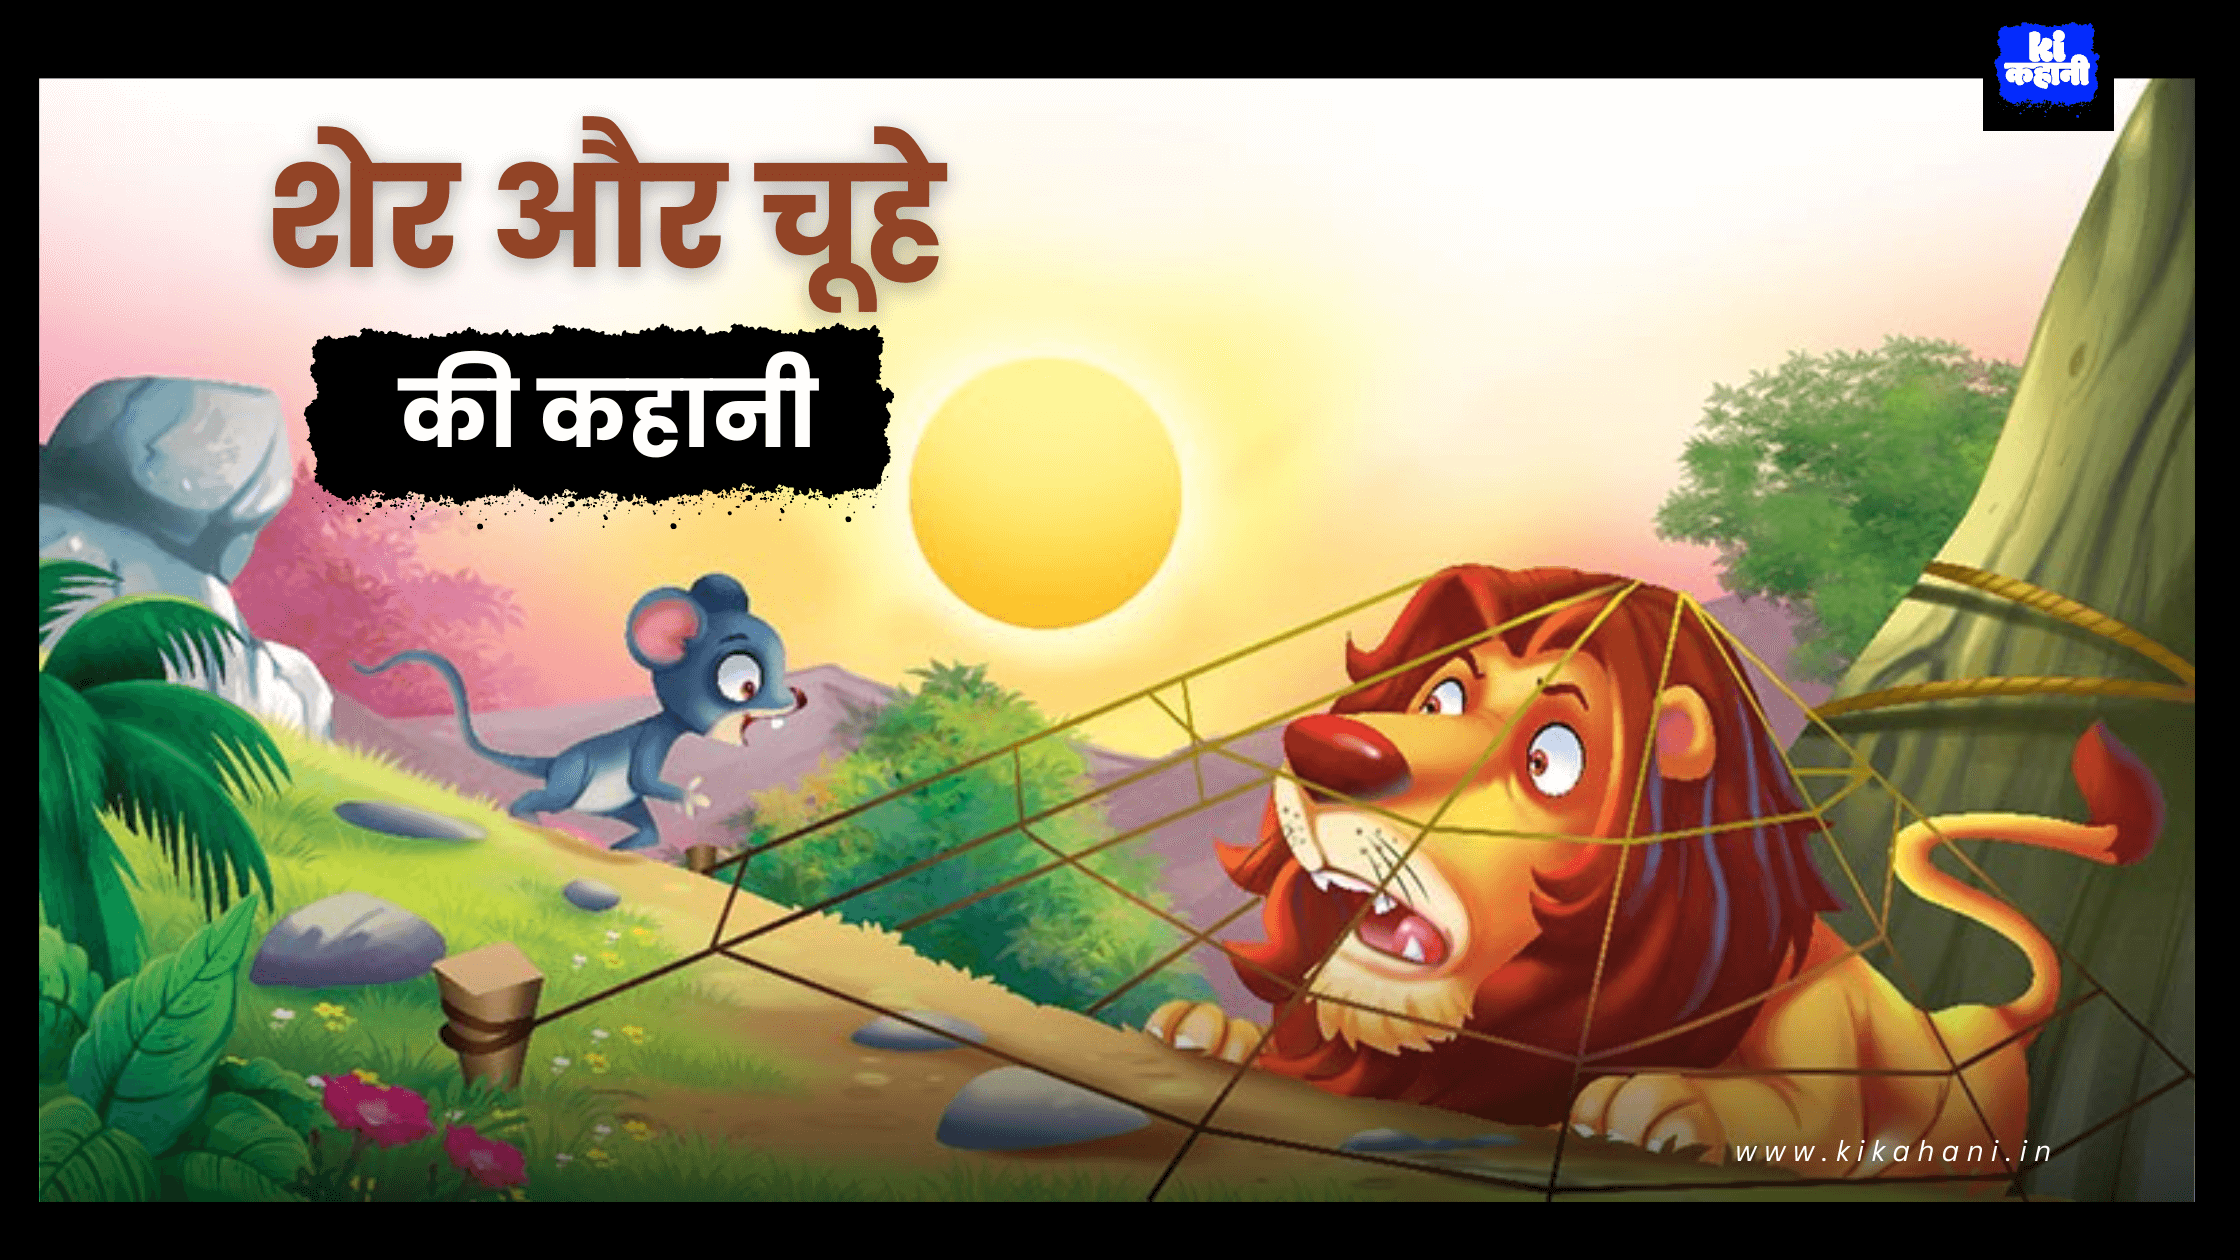 शेर और चूहे की कहानी (Lion and Mouse Story for Kids)